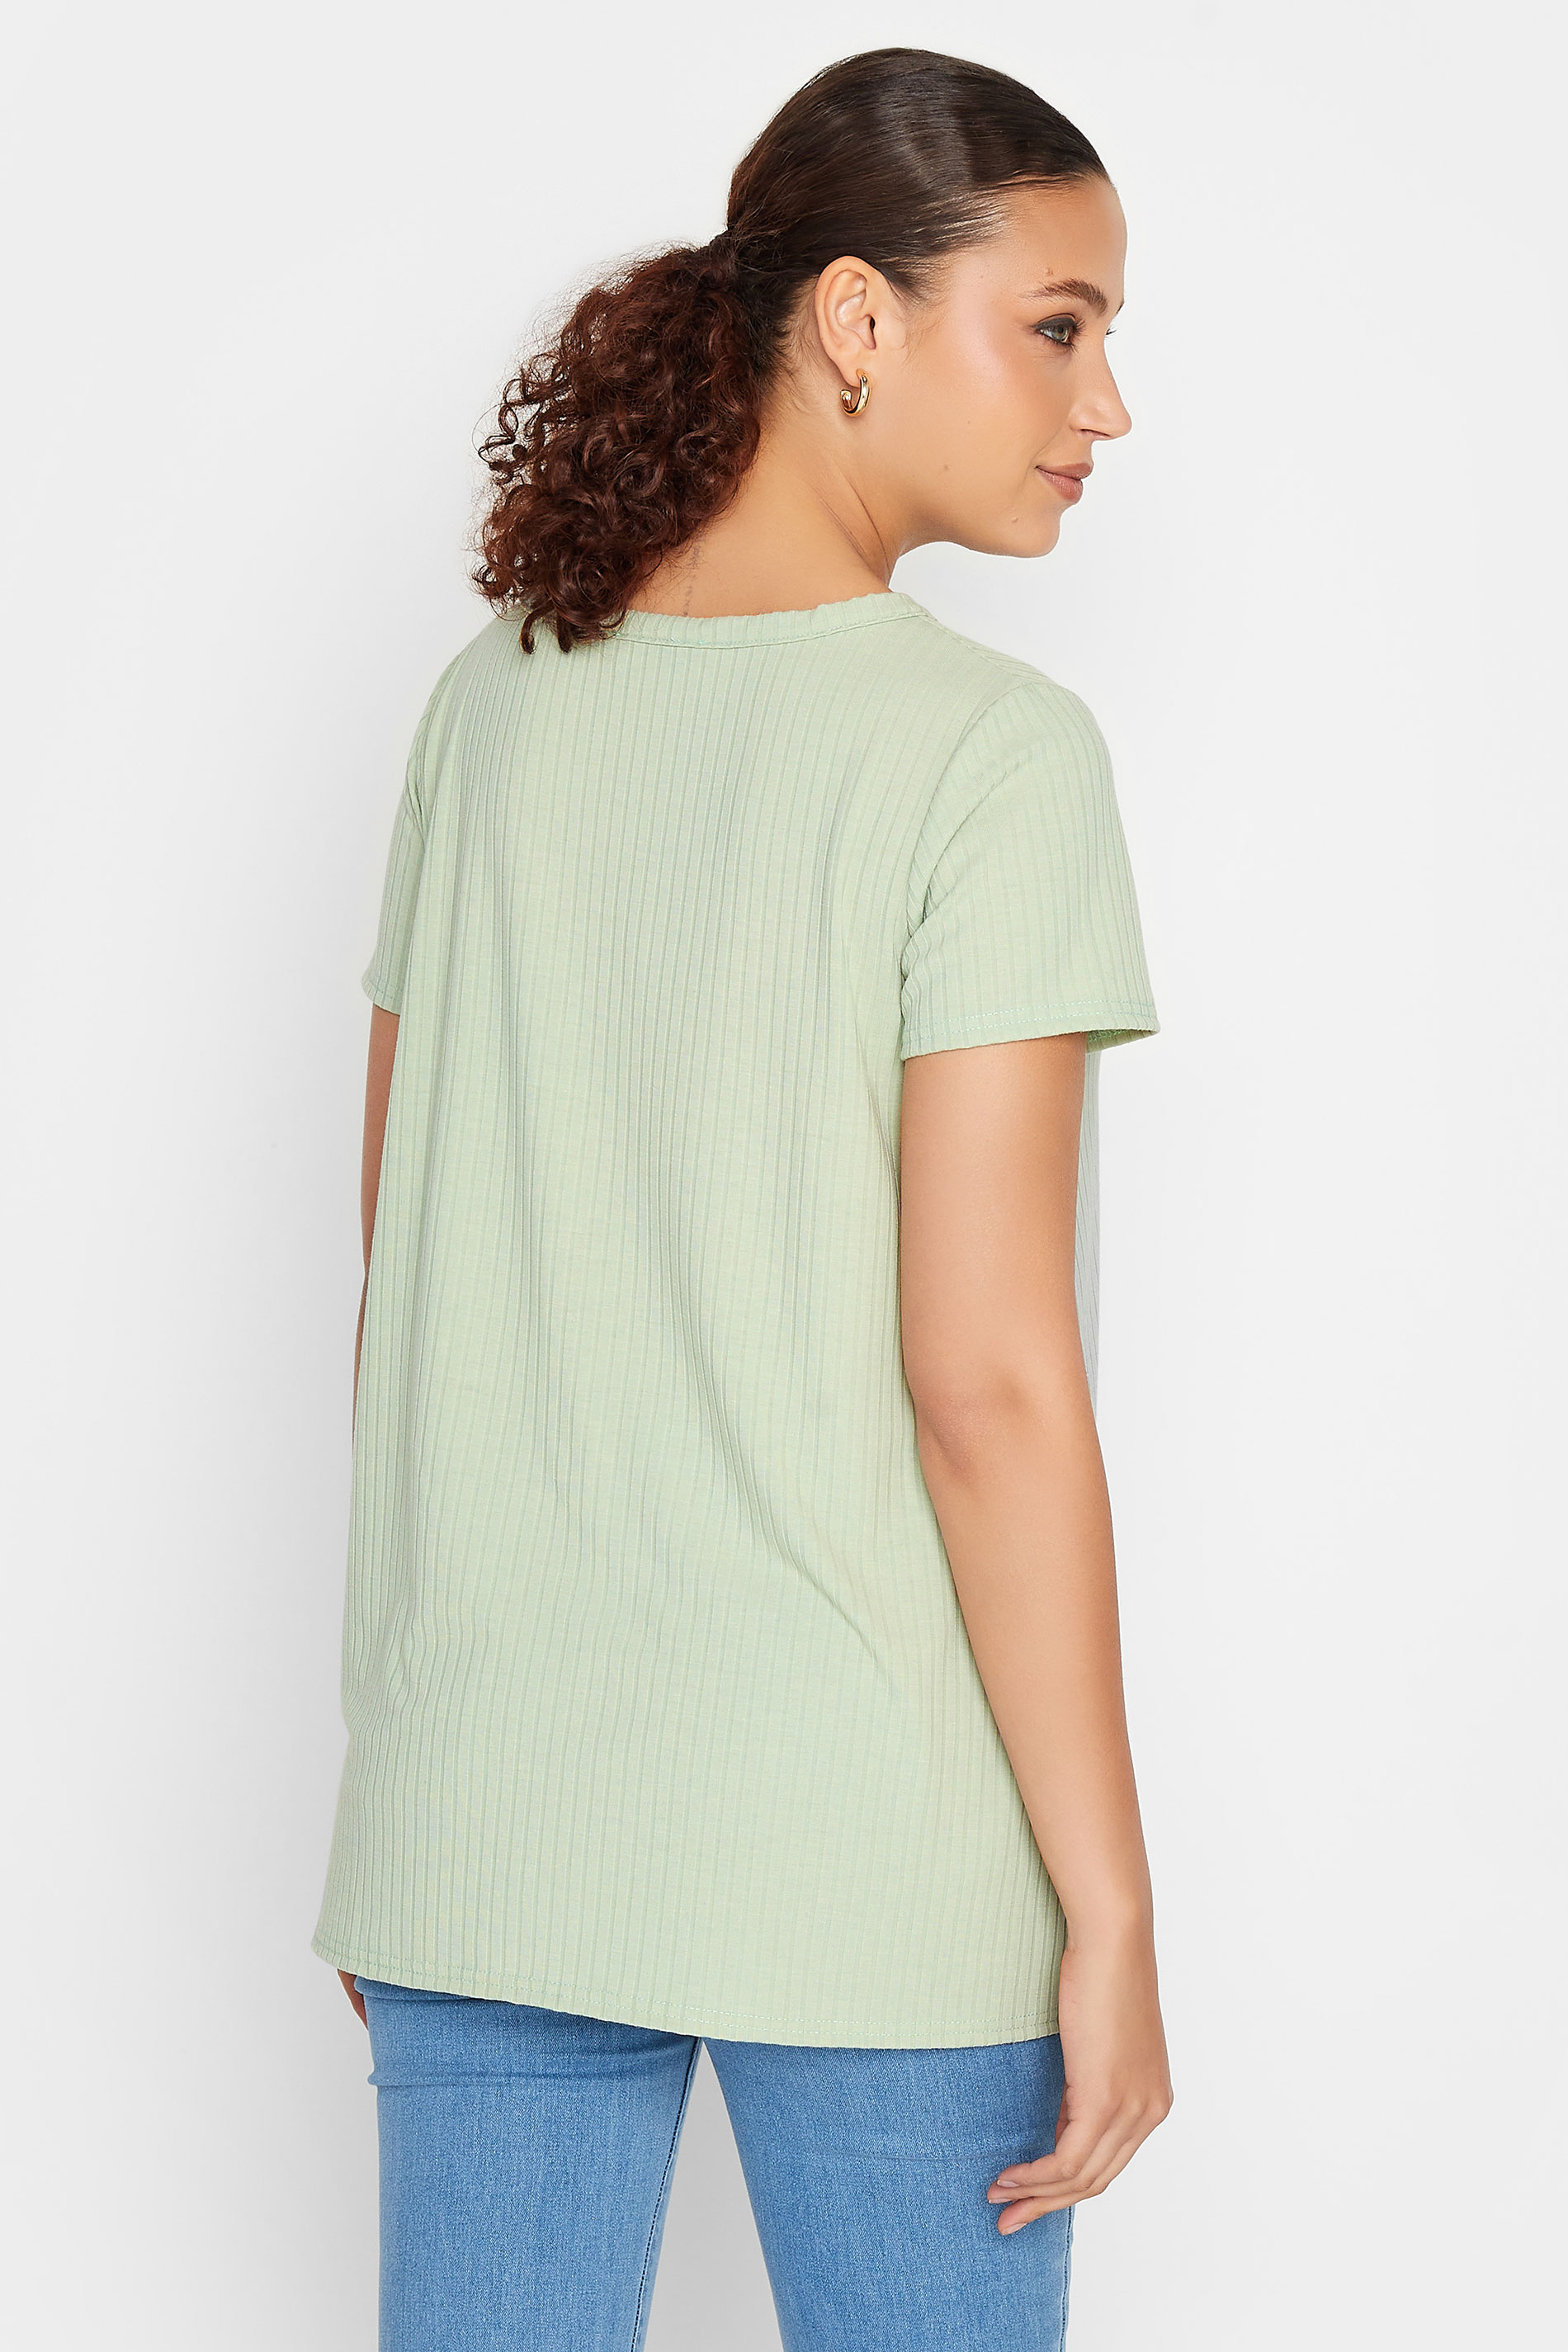 LTS Tall Women's Sage Green Ribbed V-Neck Swing Top | Long Tall Sally  3